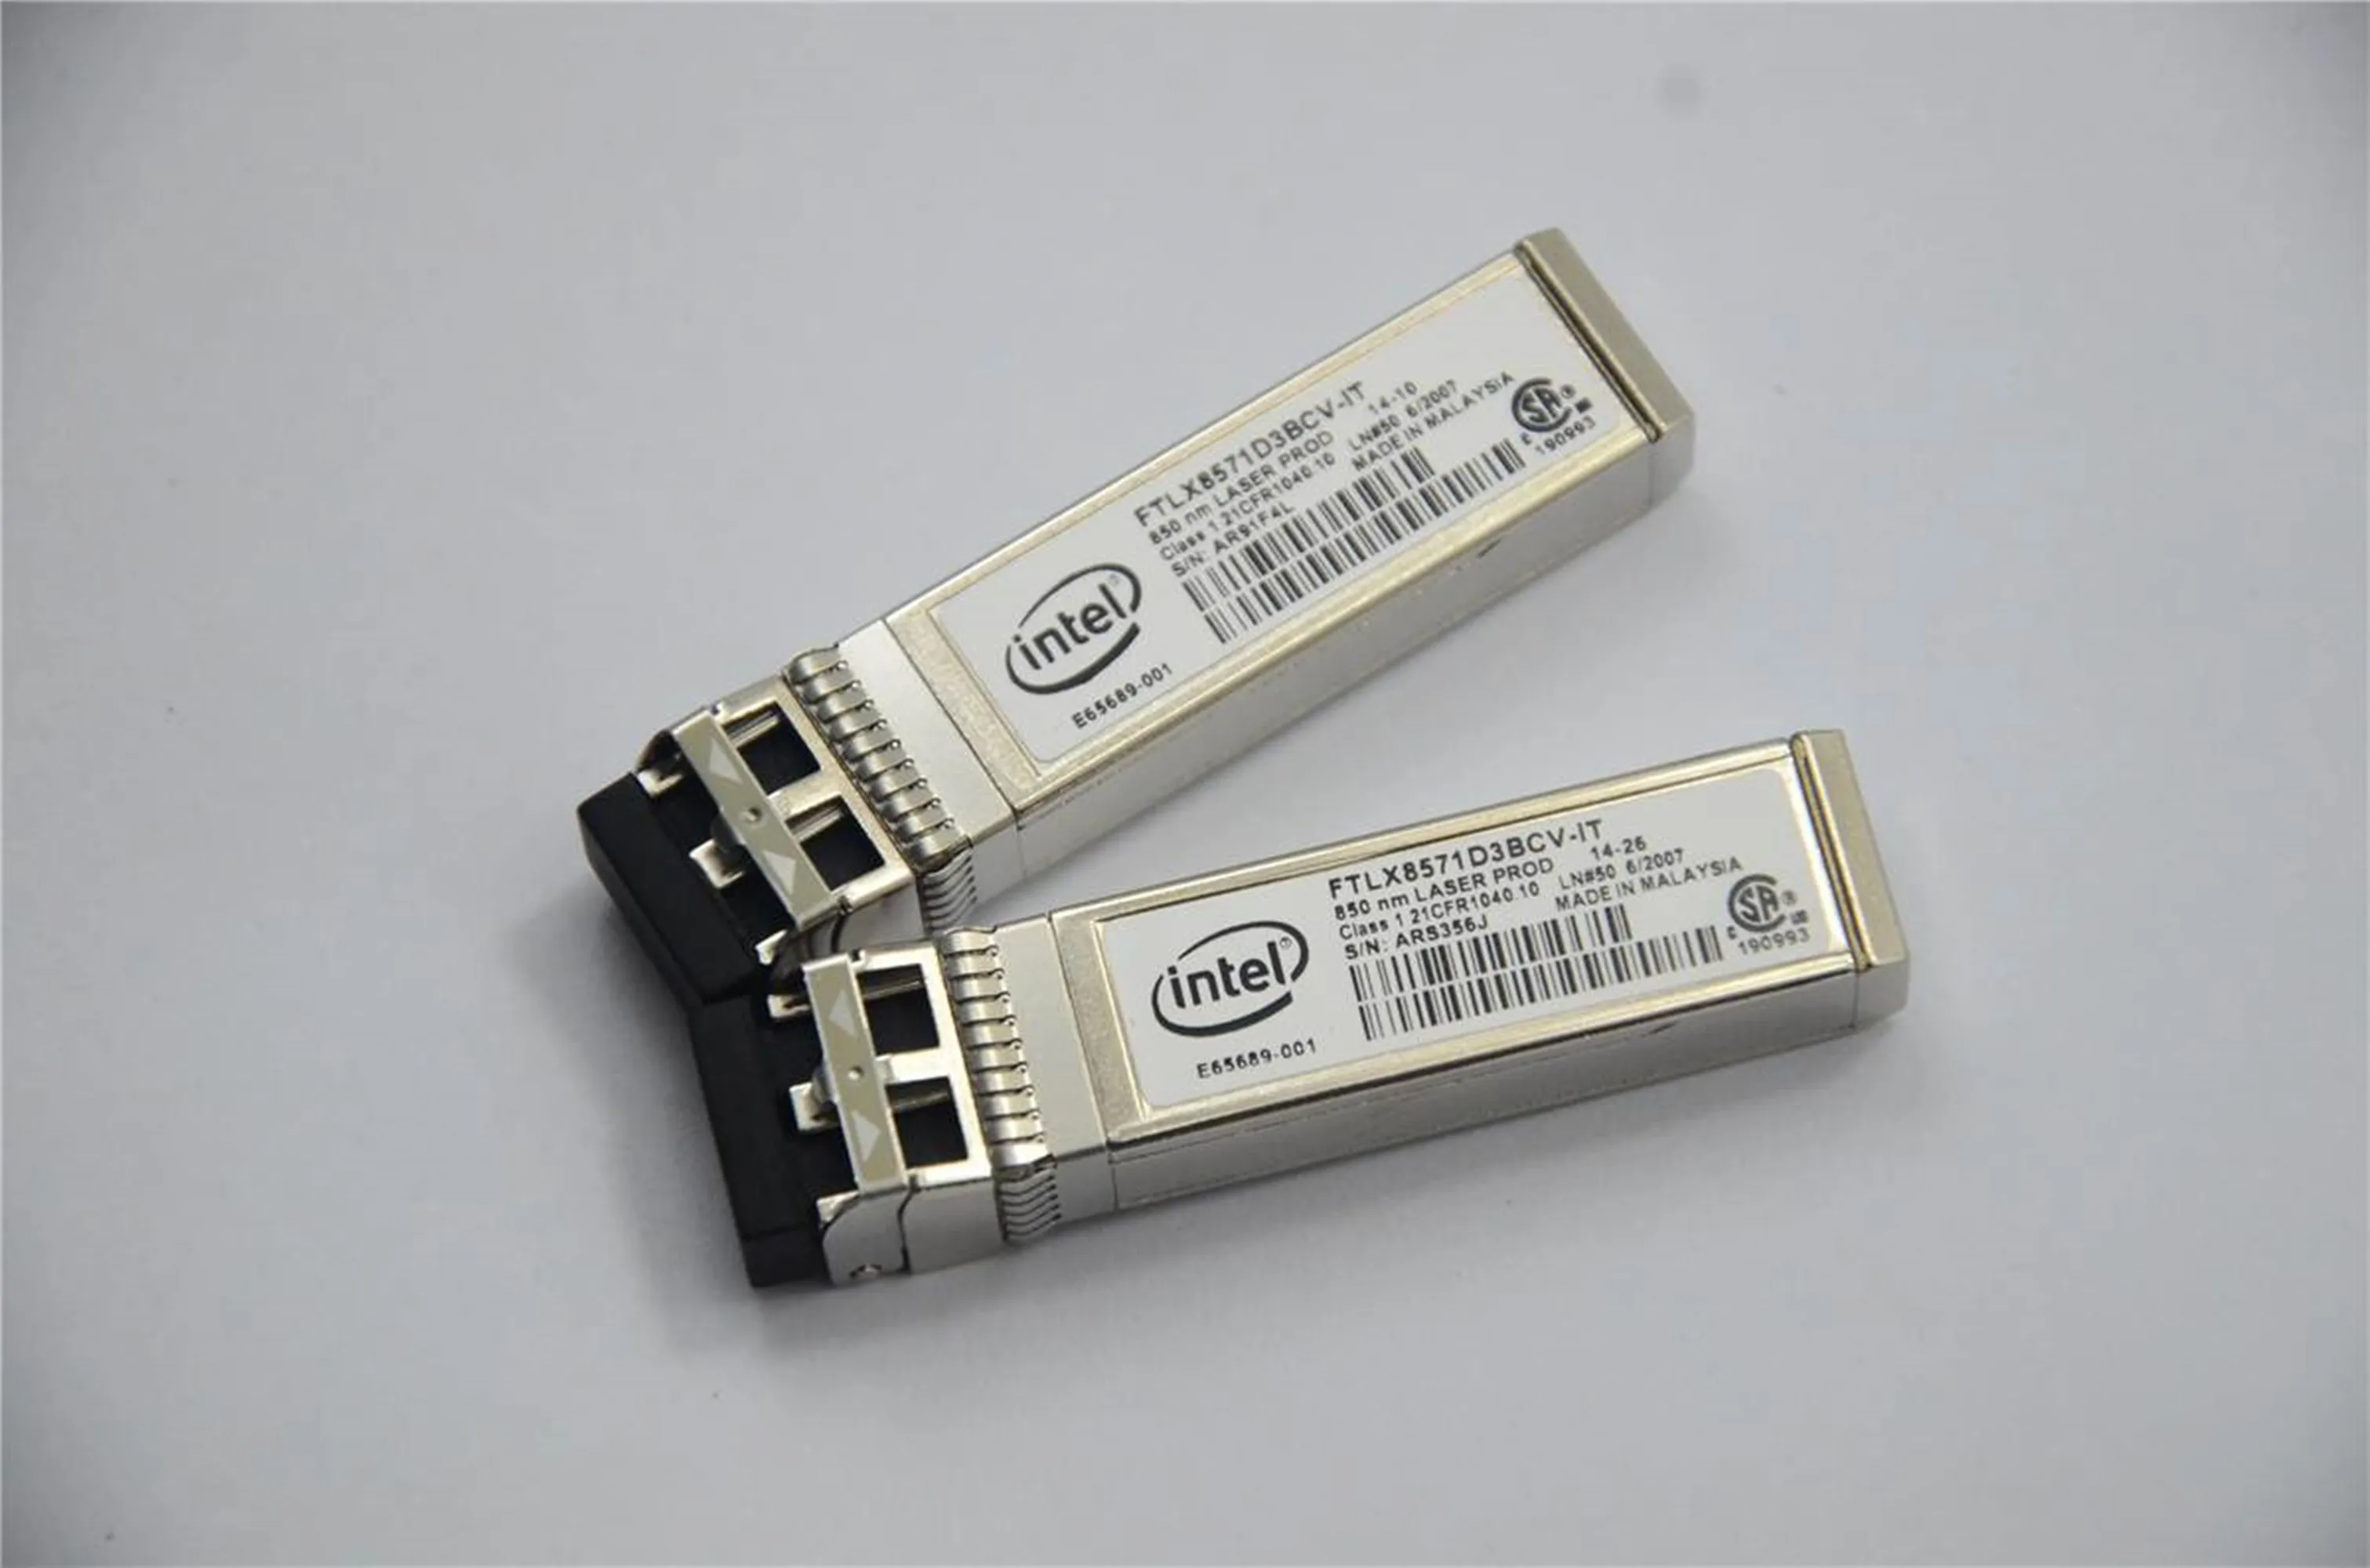 Enlarge Intel transceiver 10g sfp/FTLX8571D3BCV-IT/E65689-001/for X710 X520 network adapter switch/sfp 10gb Switch Optical fiber module